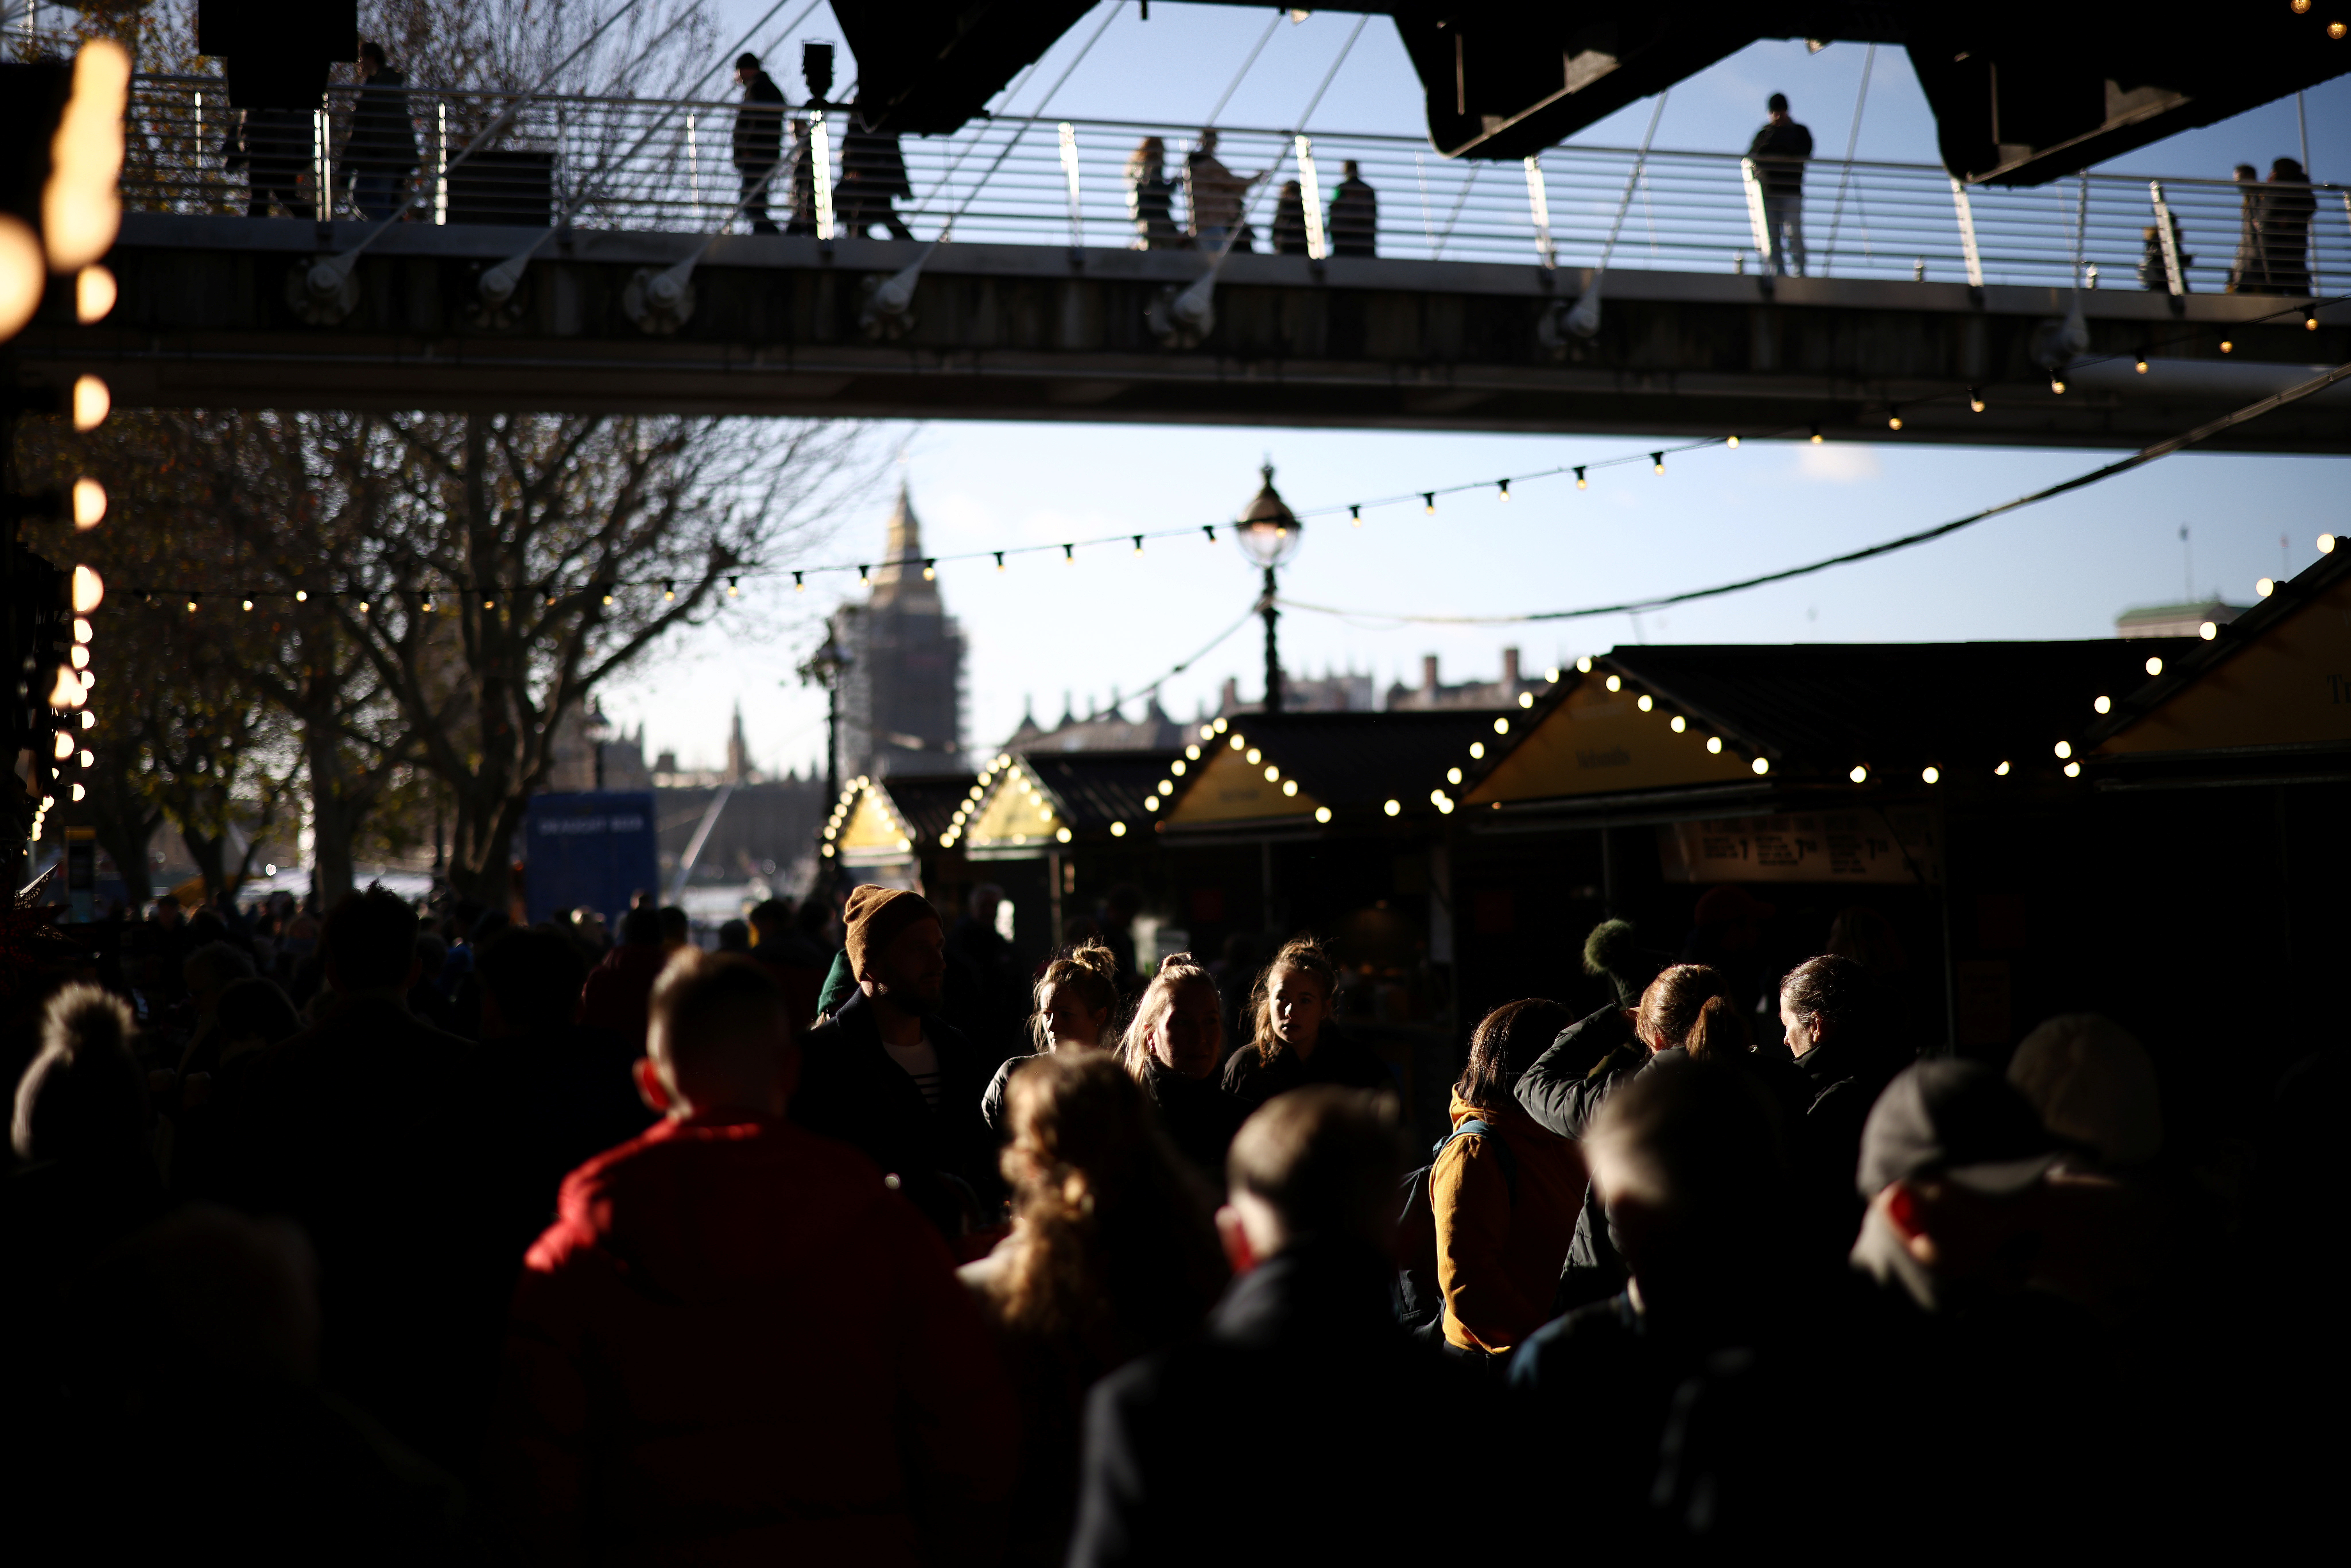 People walk through a Christmas-themed market on the South Bank, amid the coronavirus disease (COVID-19) outbreak in London, Britain, December 4, 2021. REUTERS/Henry Nicholls